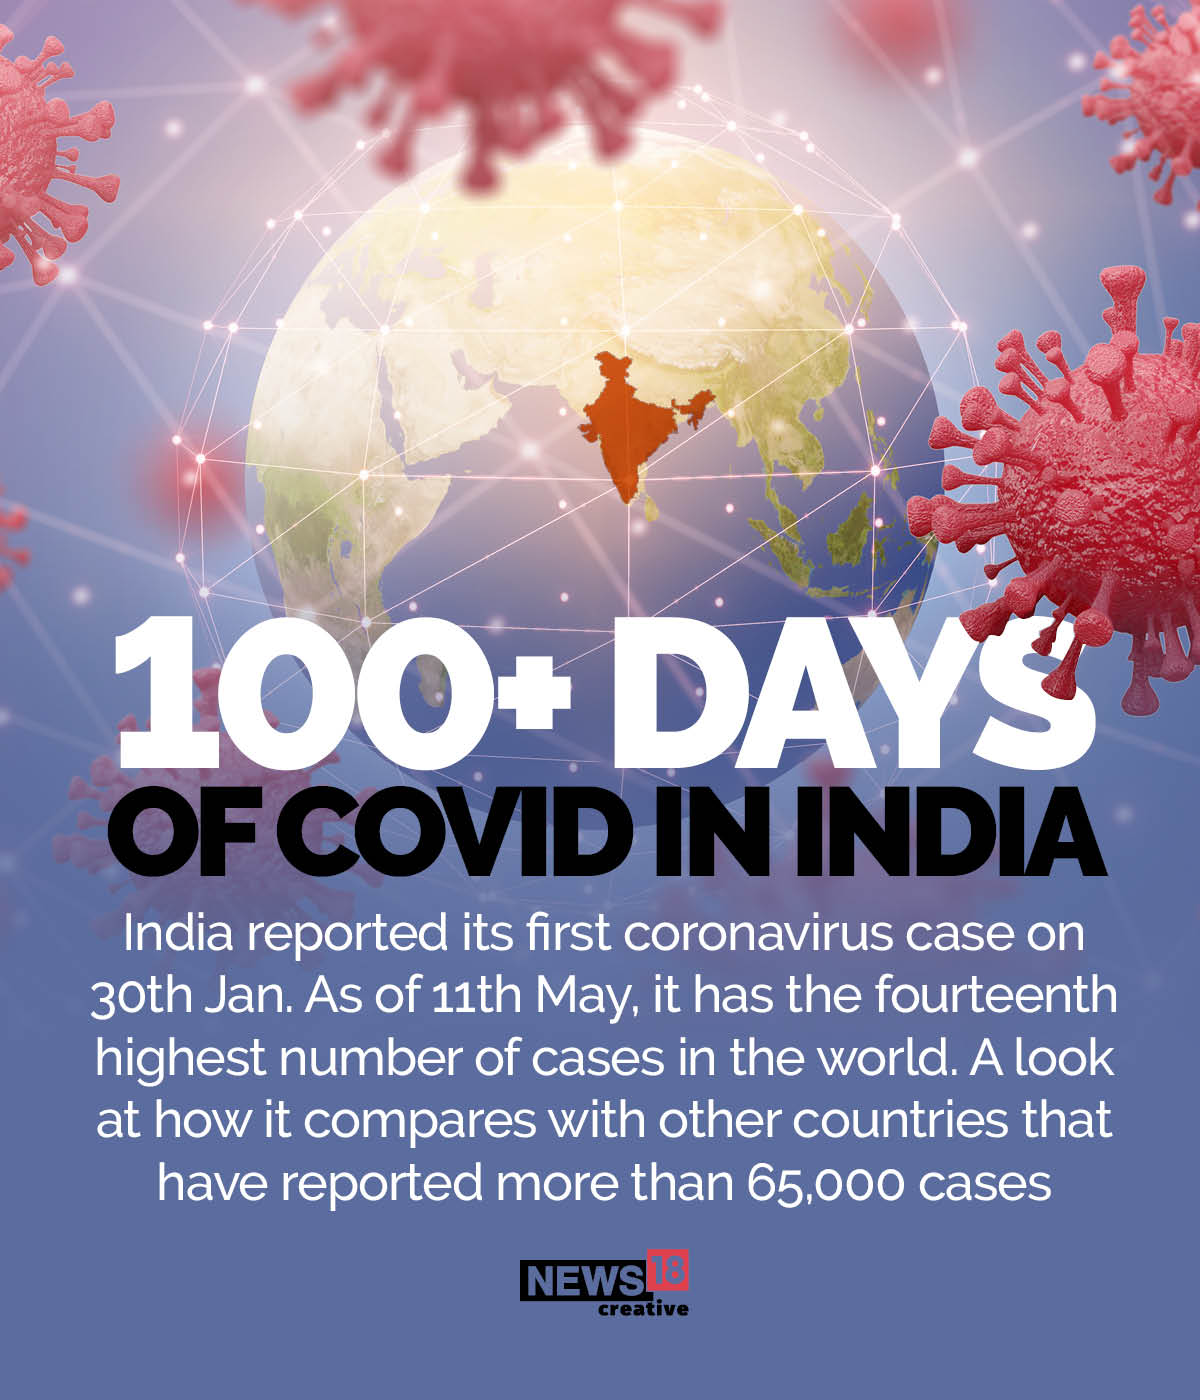 100 days of Covid-19 in India, in numbers